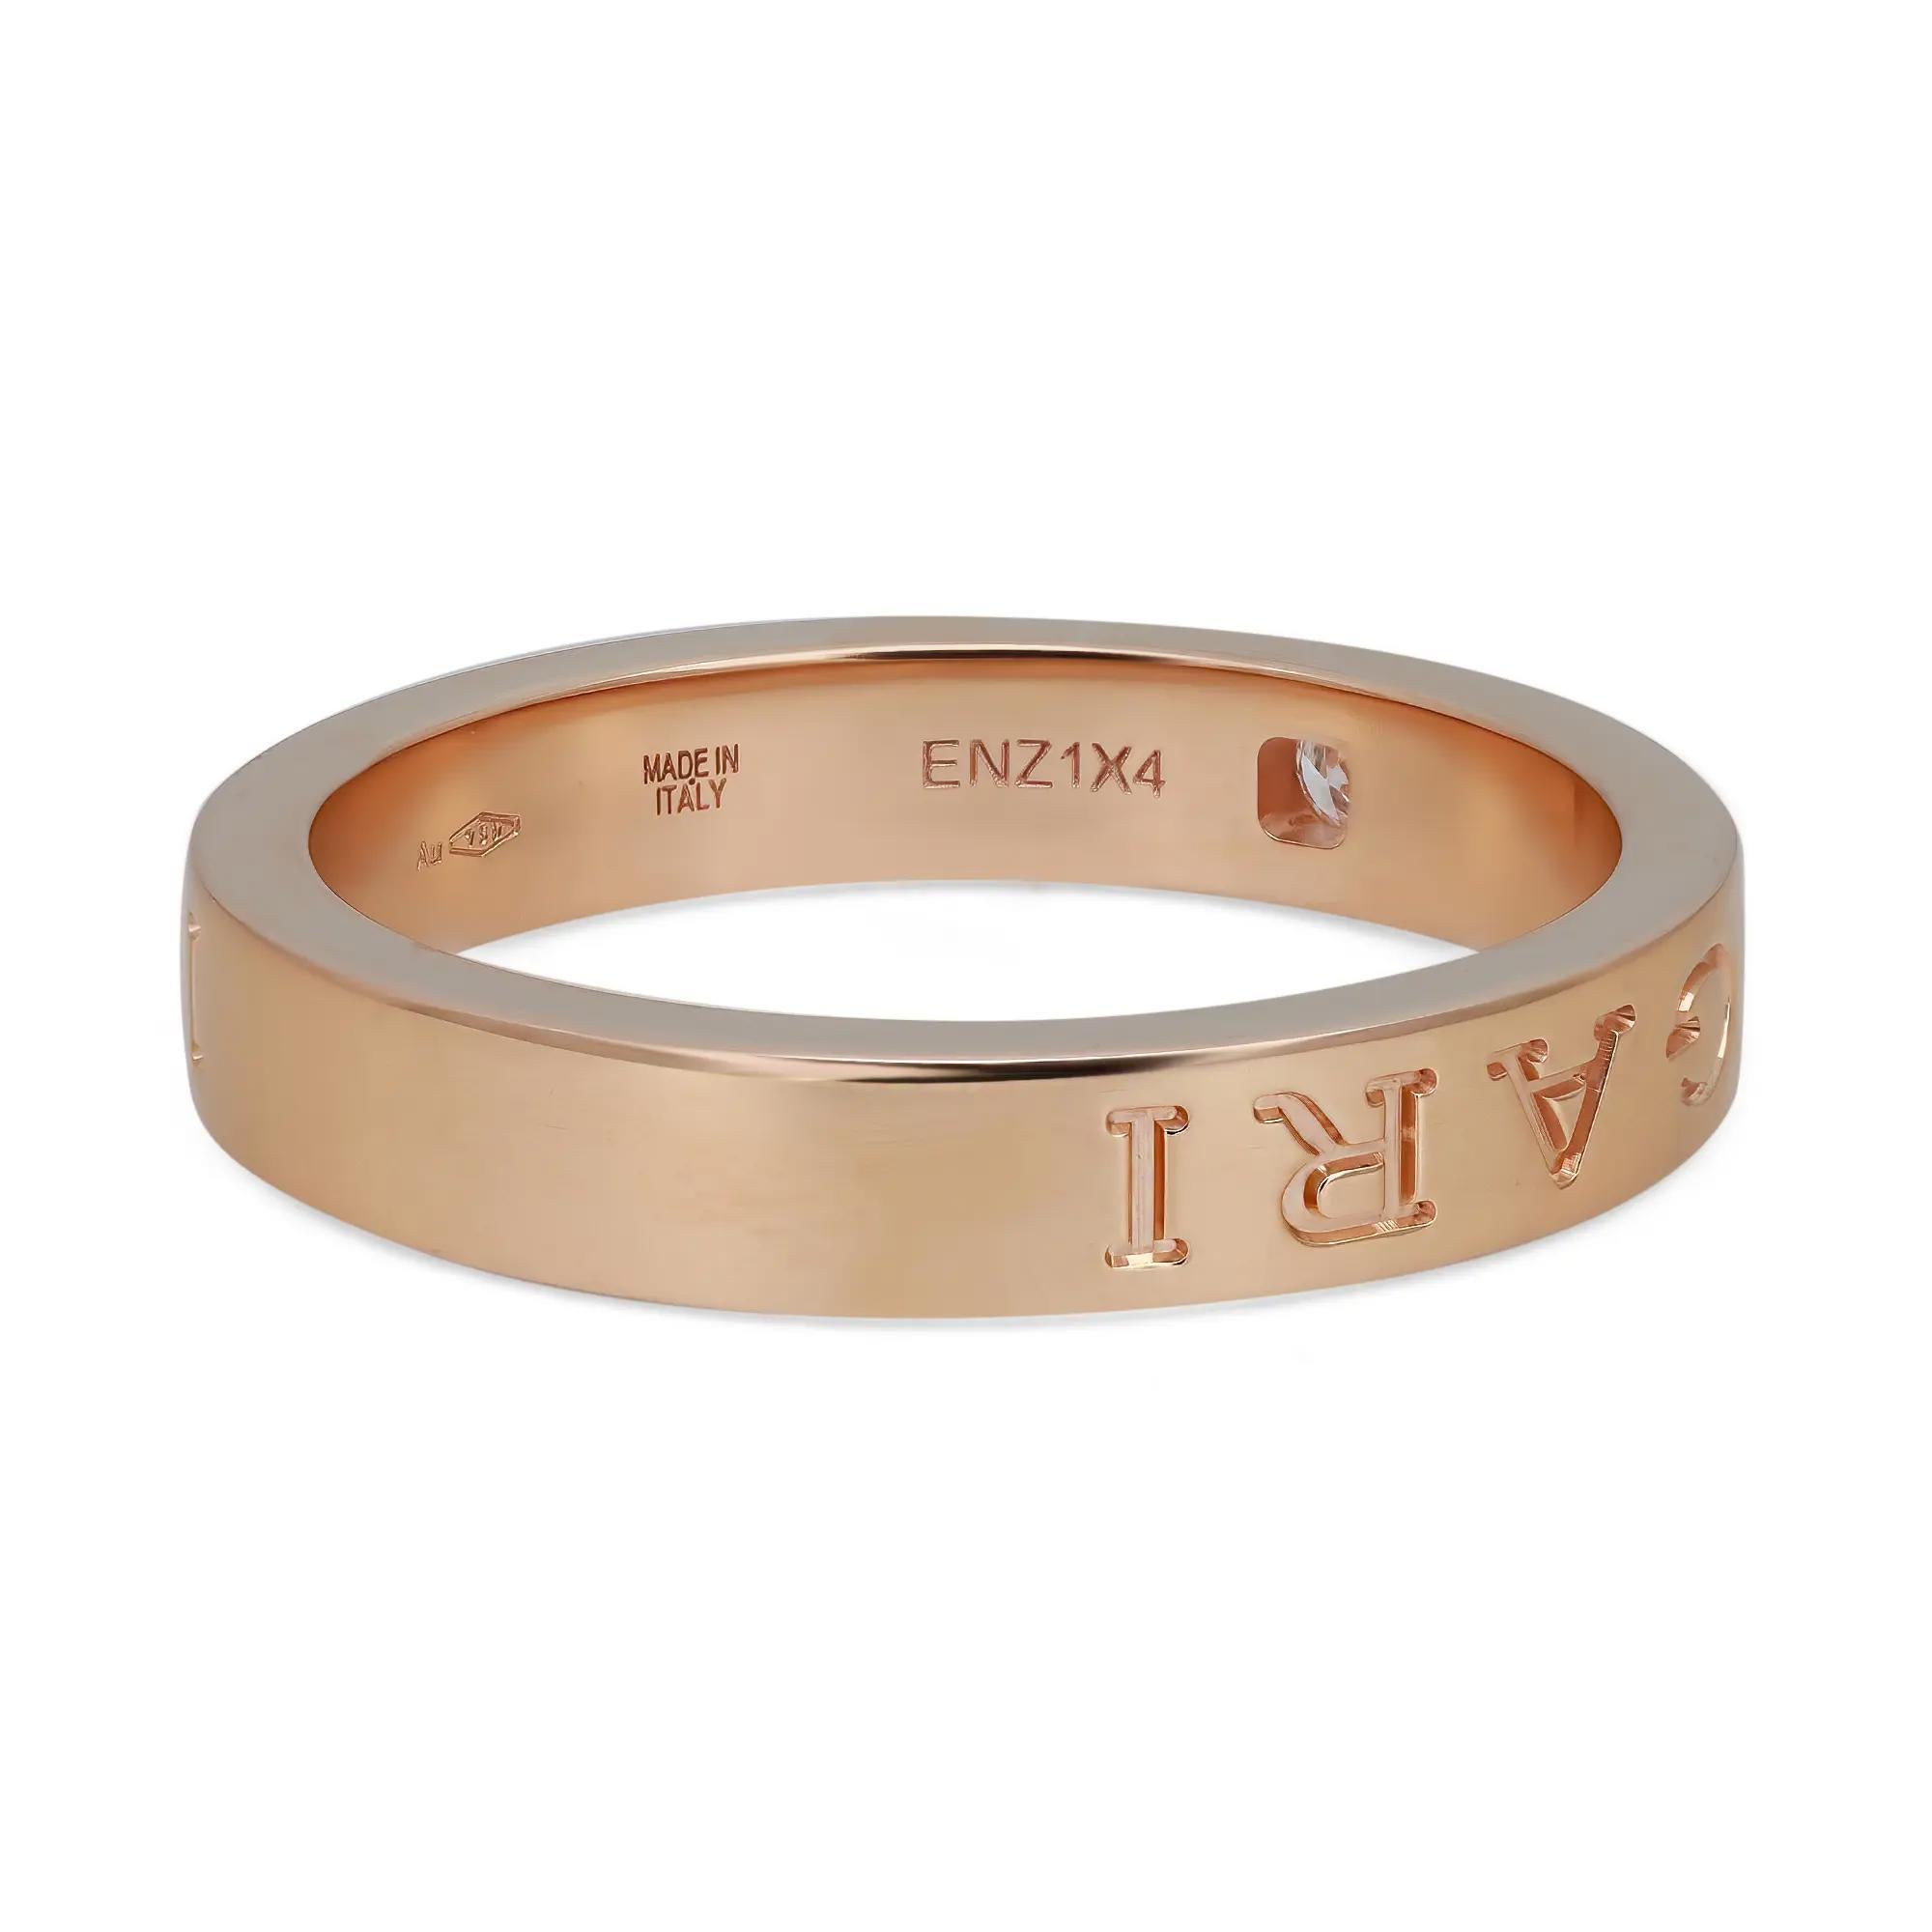 The contemporary statement of elegance by Bvlgari, this ring is crafted in lustrous 18K rose gold. It features the Bvlgari Bvlgari double logo engraving with a center single diamond weighing 0.04 carat. With modern yet timeless styling, this ring is